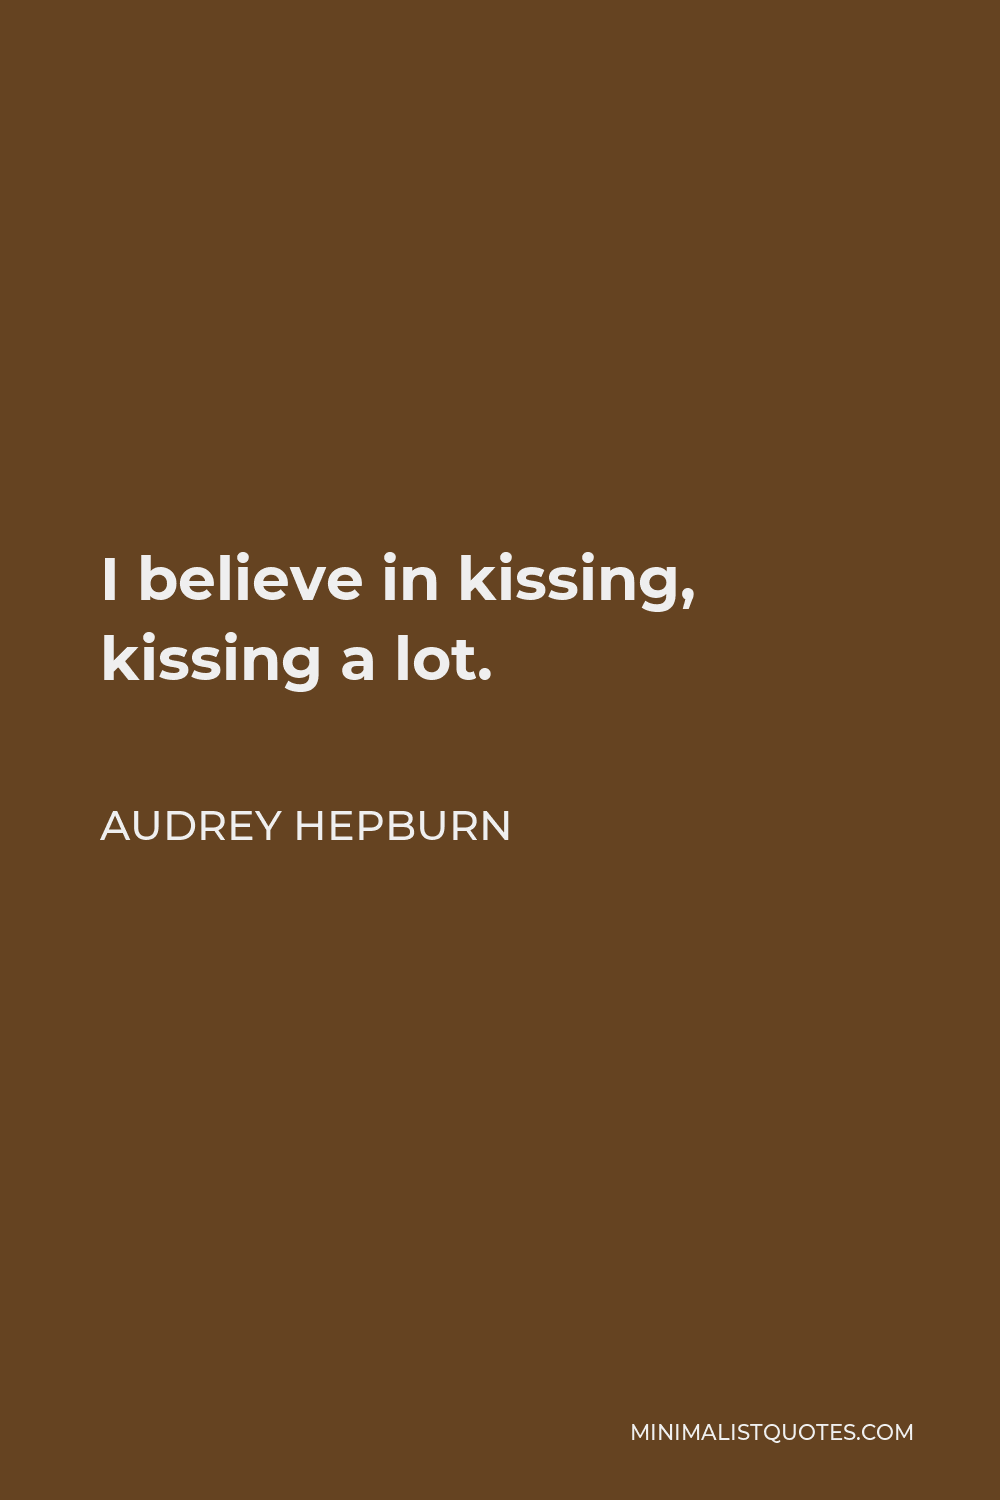 Audrey Hepburn Quote - I believe in kissing, kissing a lot.